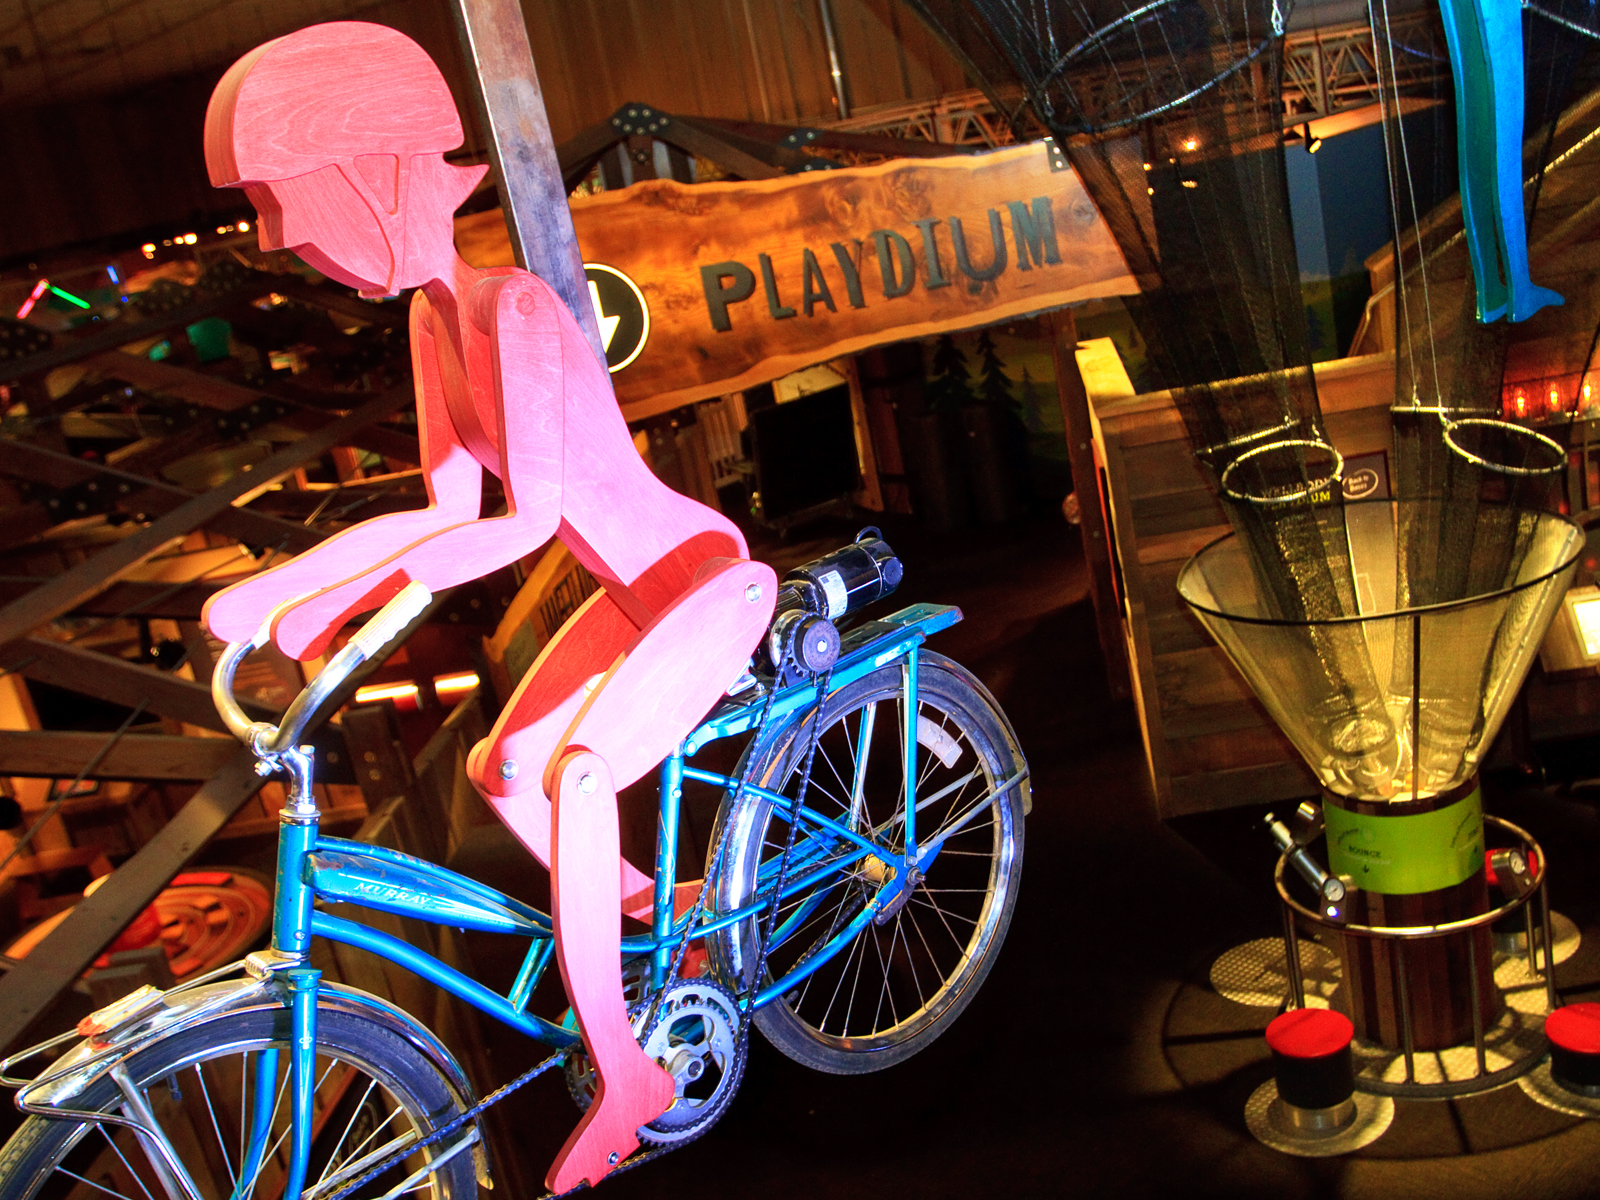 View from above the Playdium section, with a red wooden figure riding a bike in the foreground